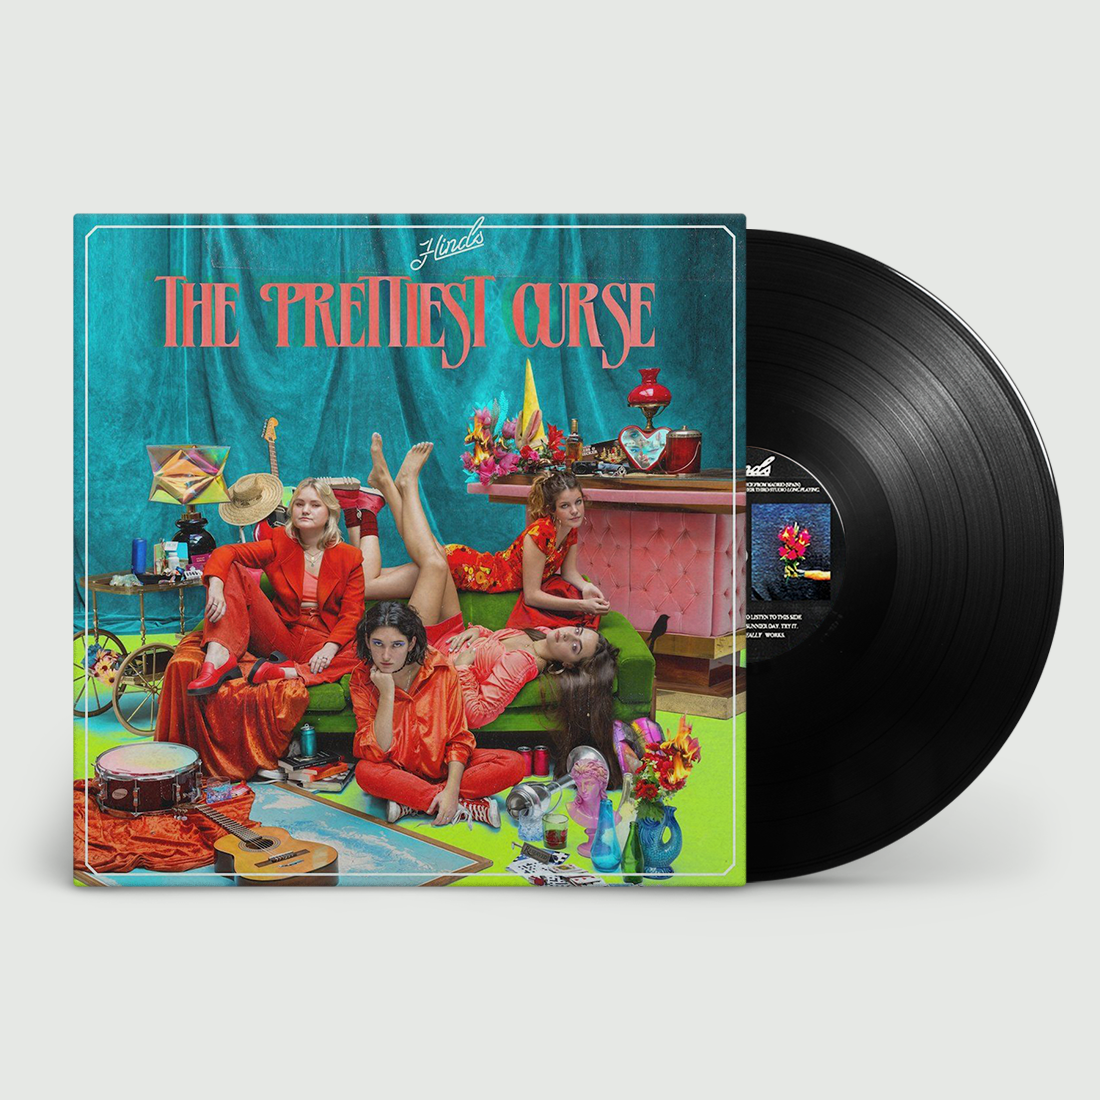 RECORD OF THE WEEK // HINDS – THE PRETTIEST CURSE